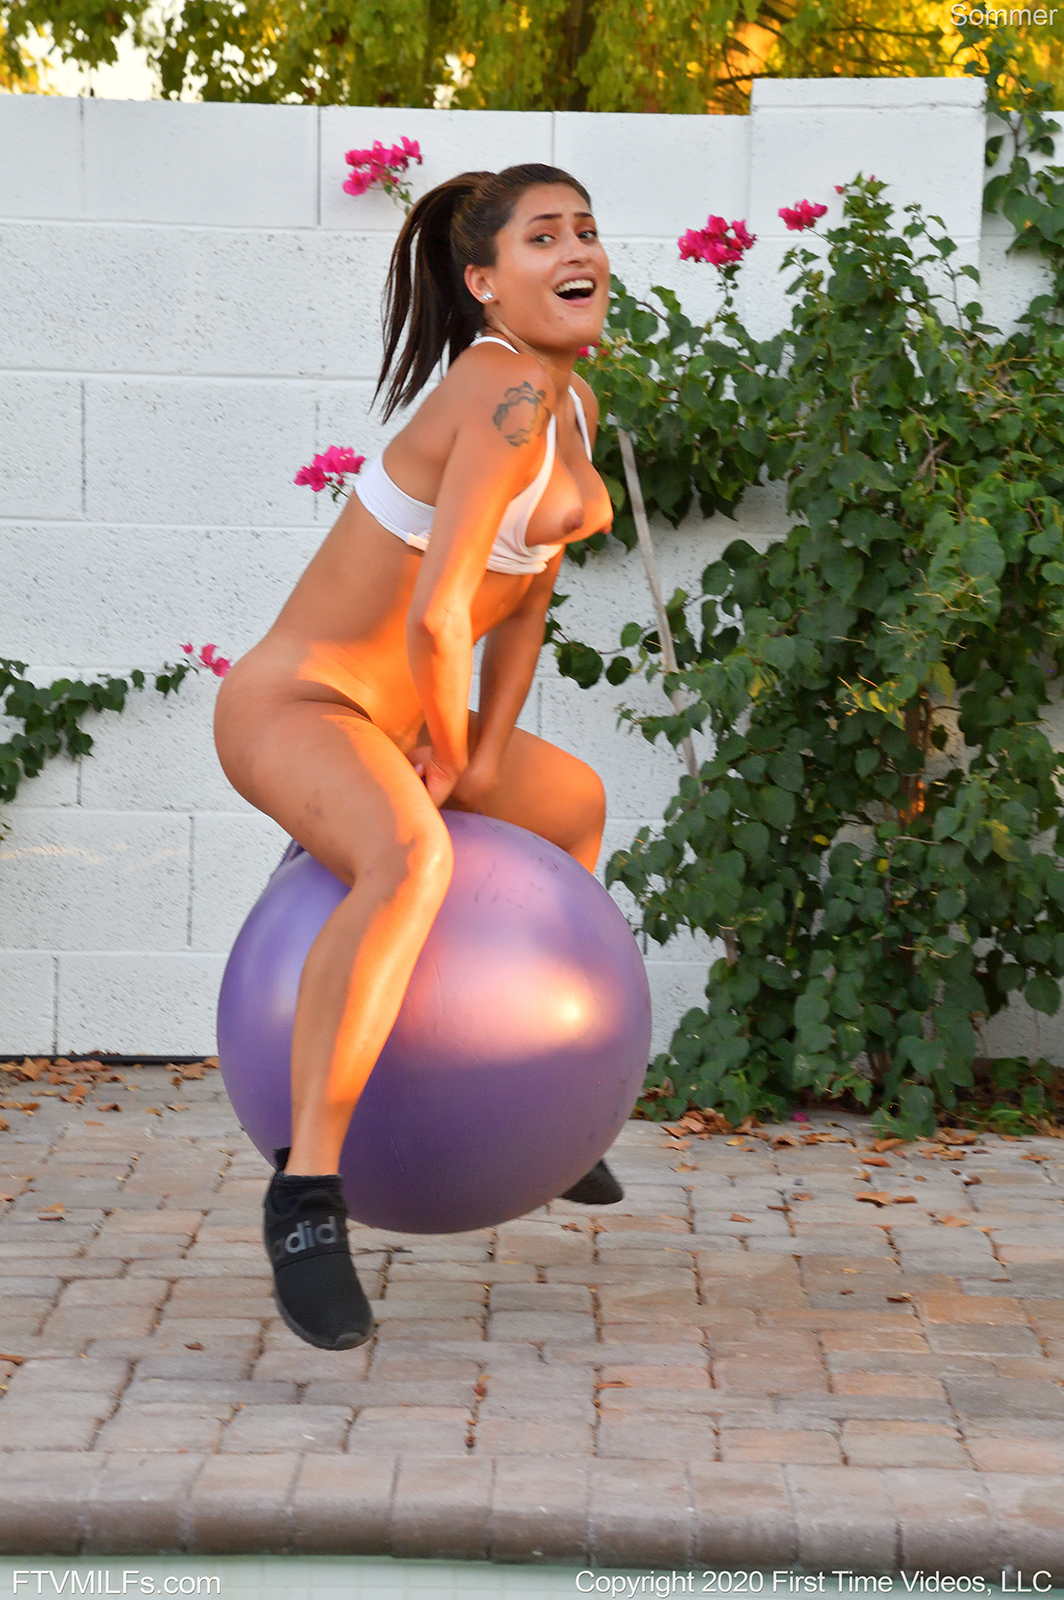 mature Sommer FTV is sitting on a gym ball as she bounces from it while naked showing her tits near a pool